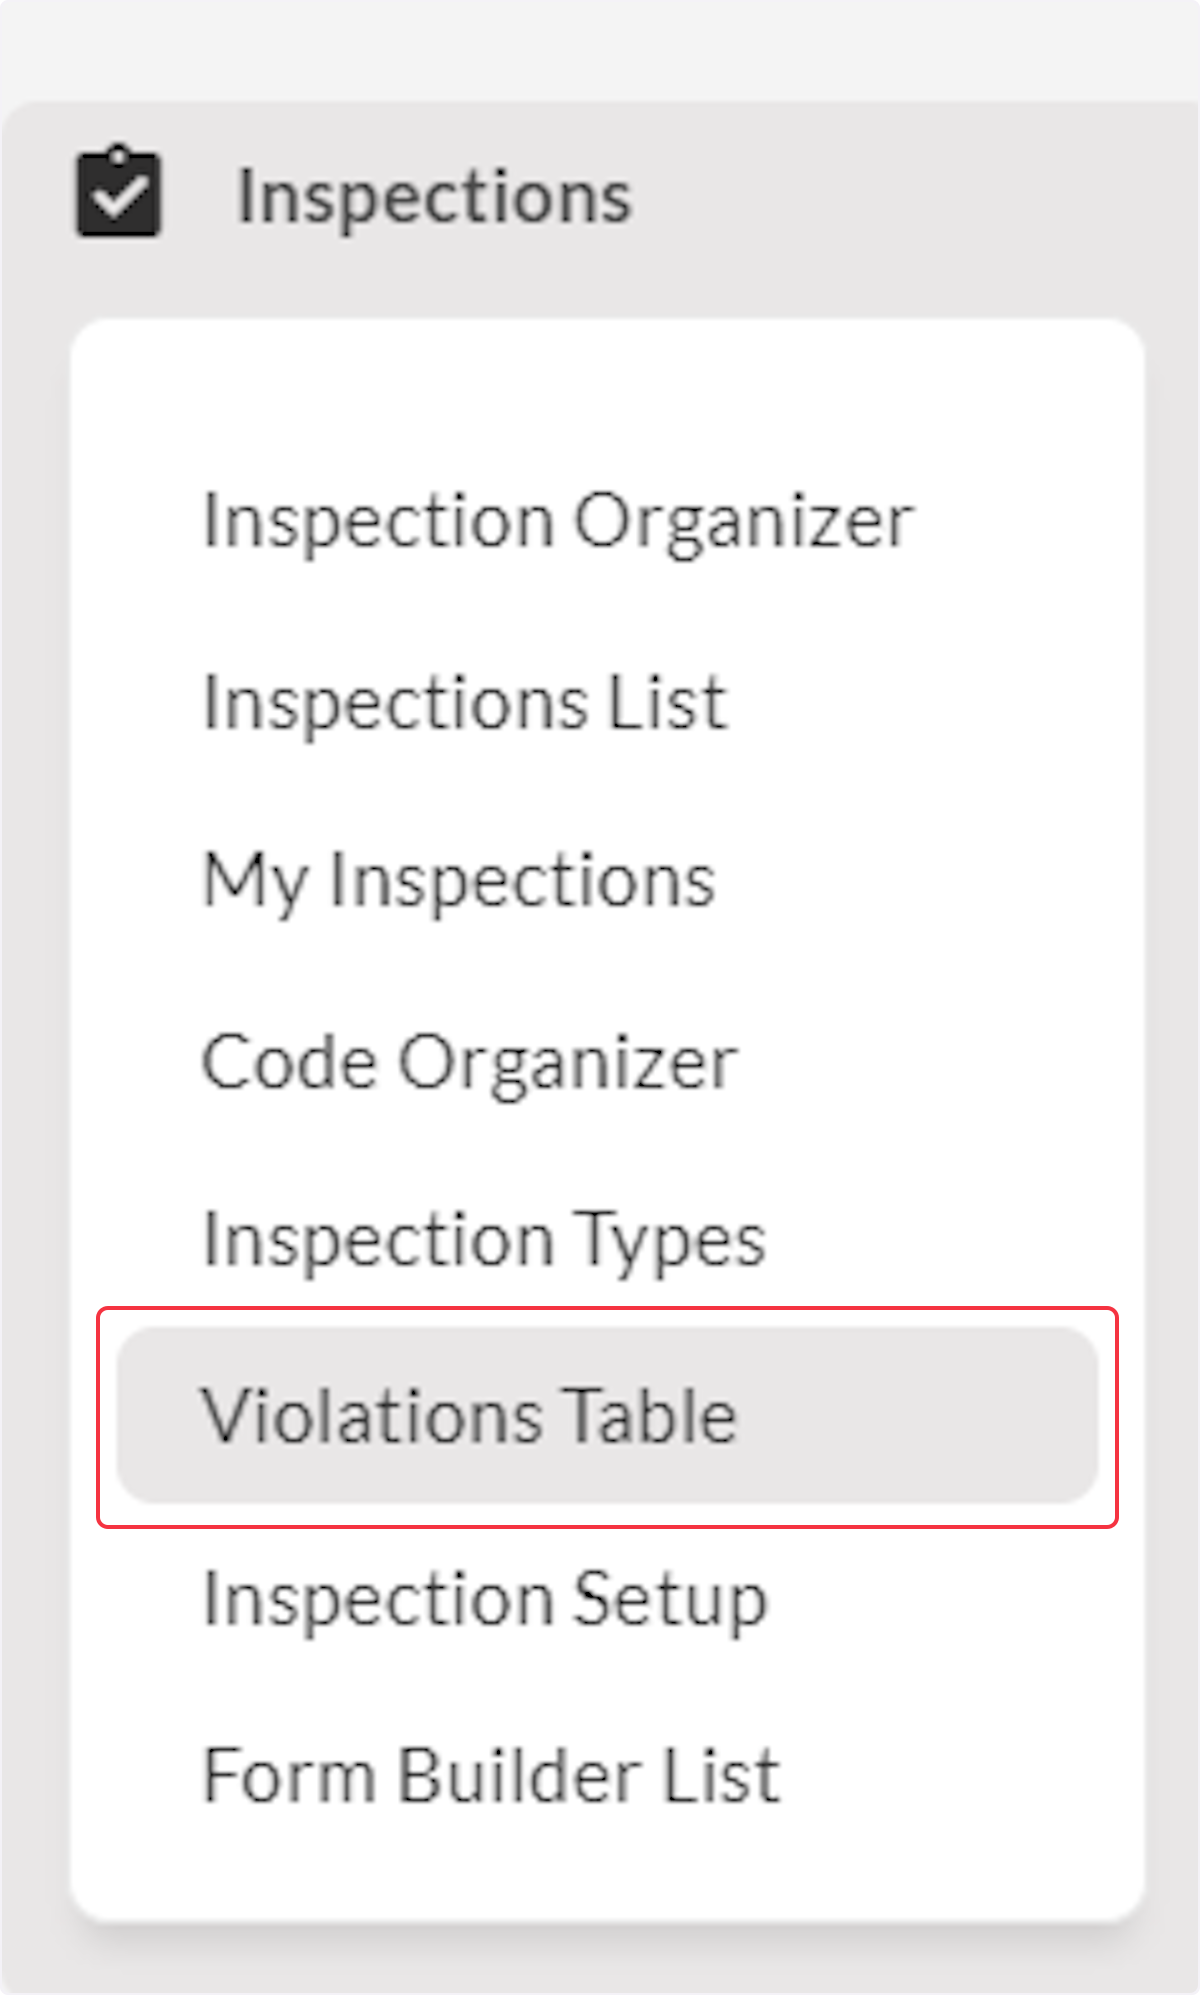 Click on Violations Table